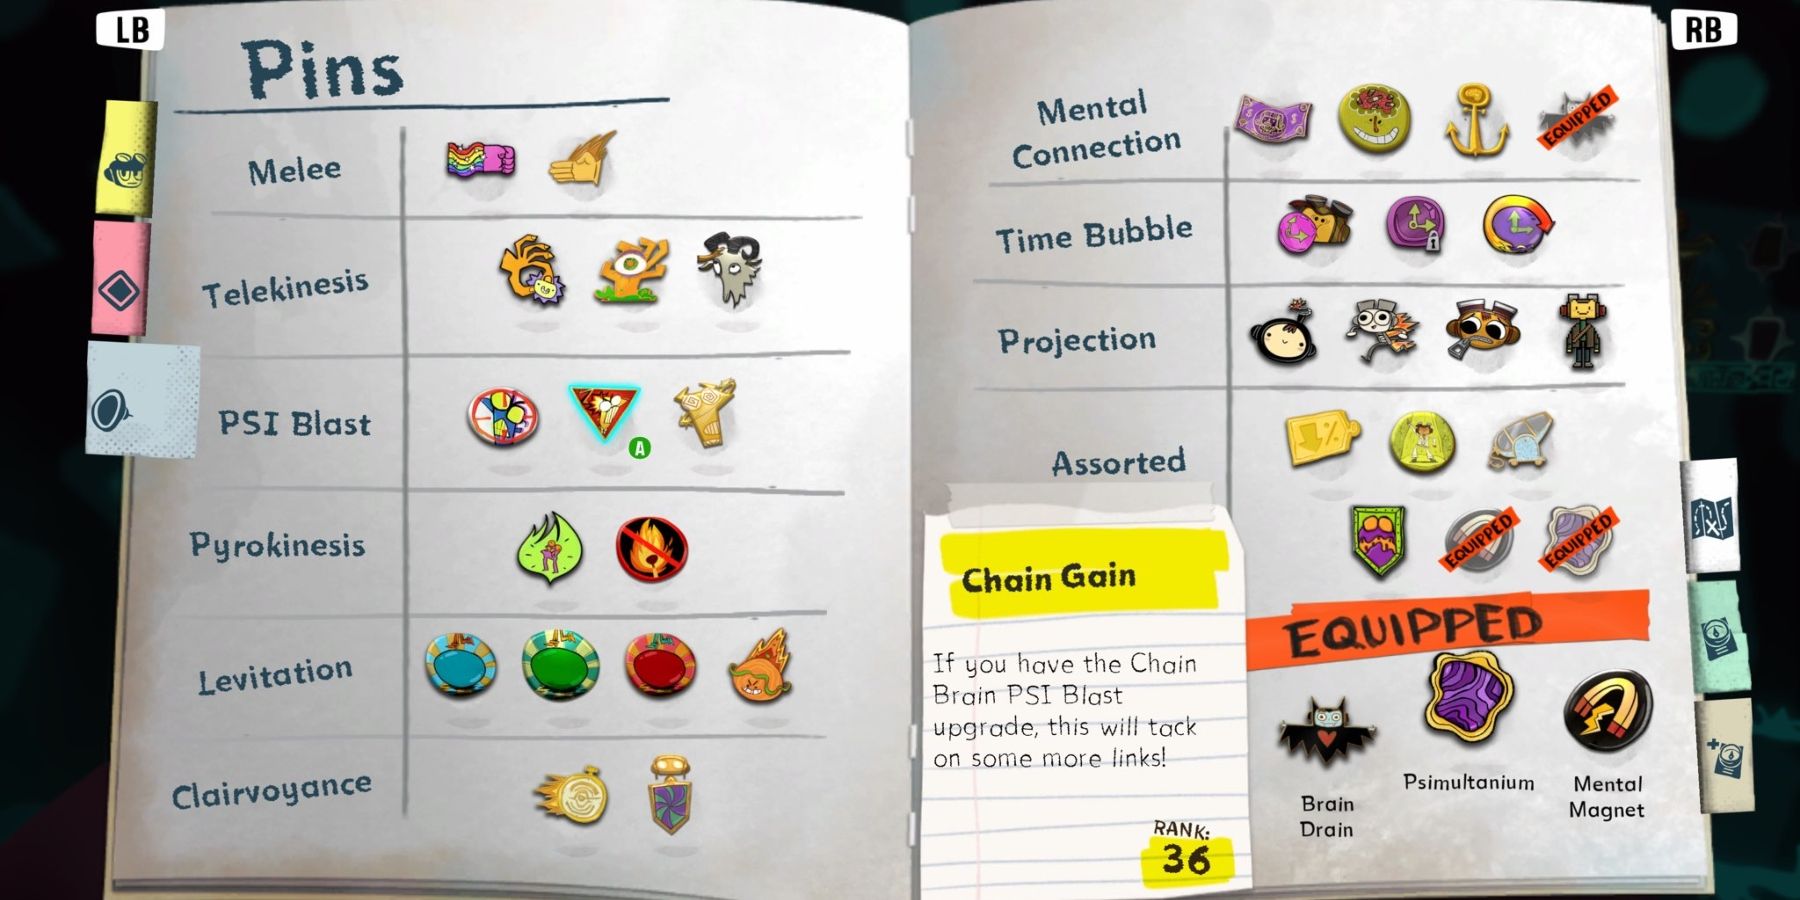 A menu screen with various icons representing different pins arranged next to the ability they augment